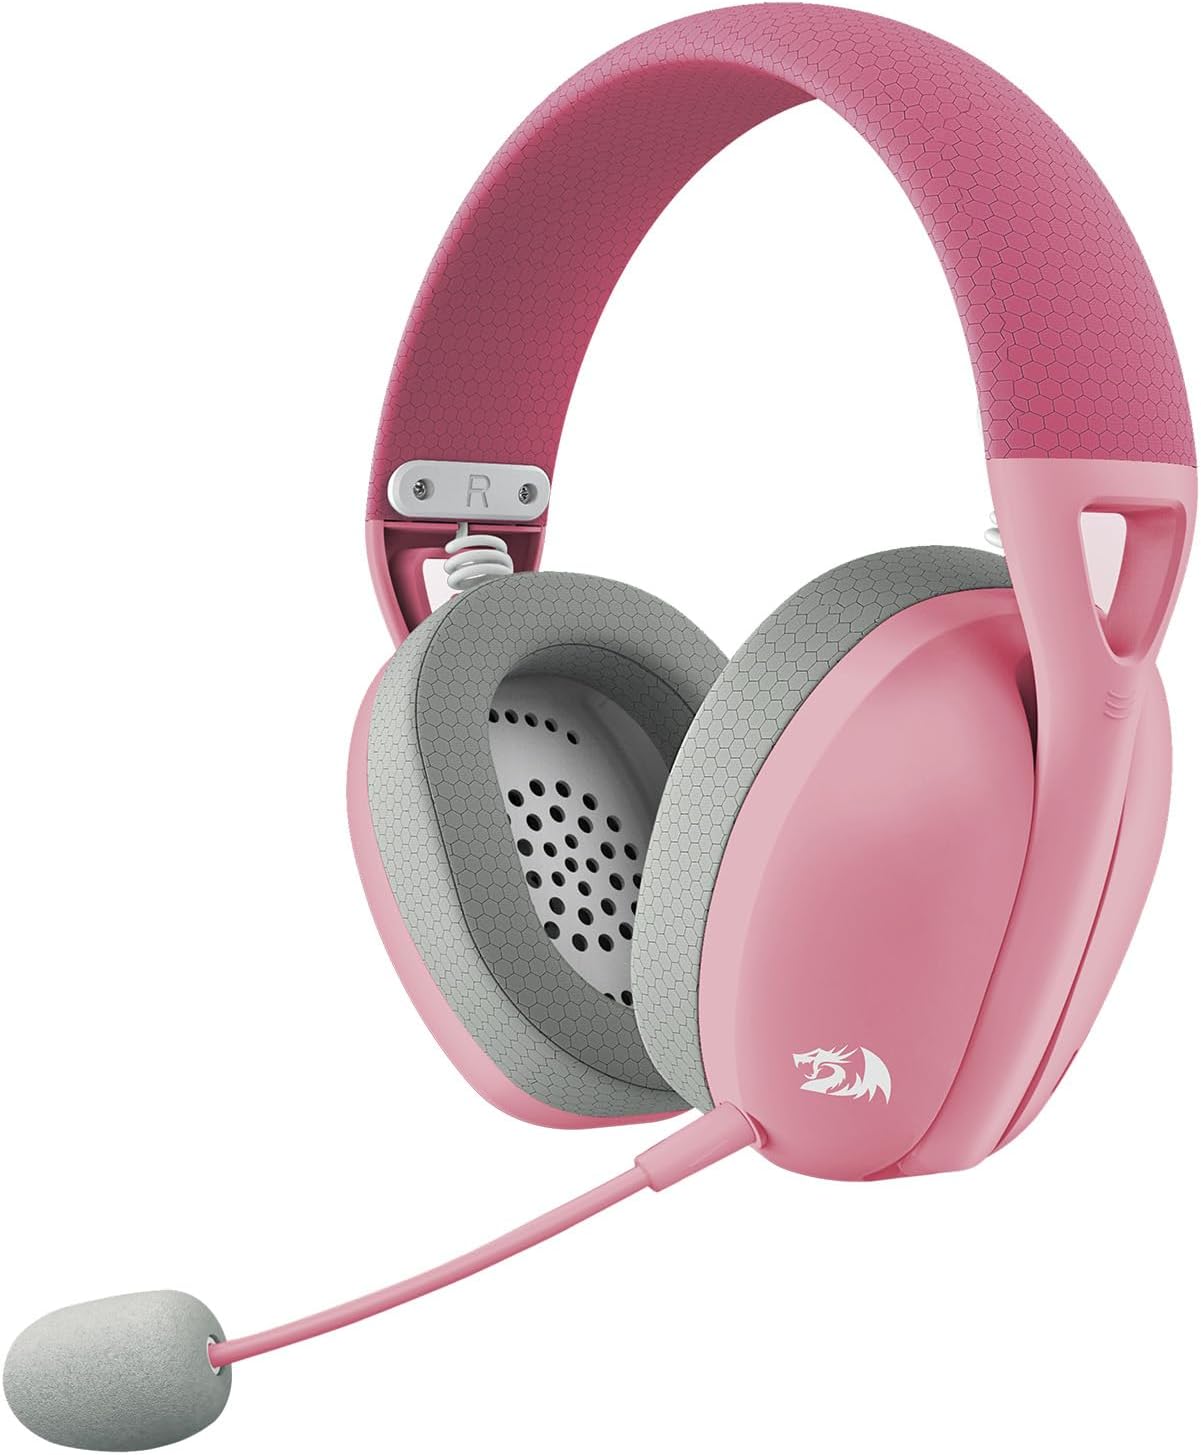 Redragon H848 Bluetooth Wireless Gaming Headset - Lightweight - 7.1 Surround Sound - 40MM Drivers - Detachable Microphone, Pink